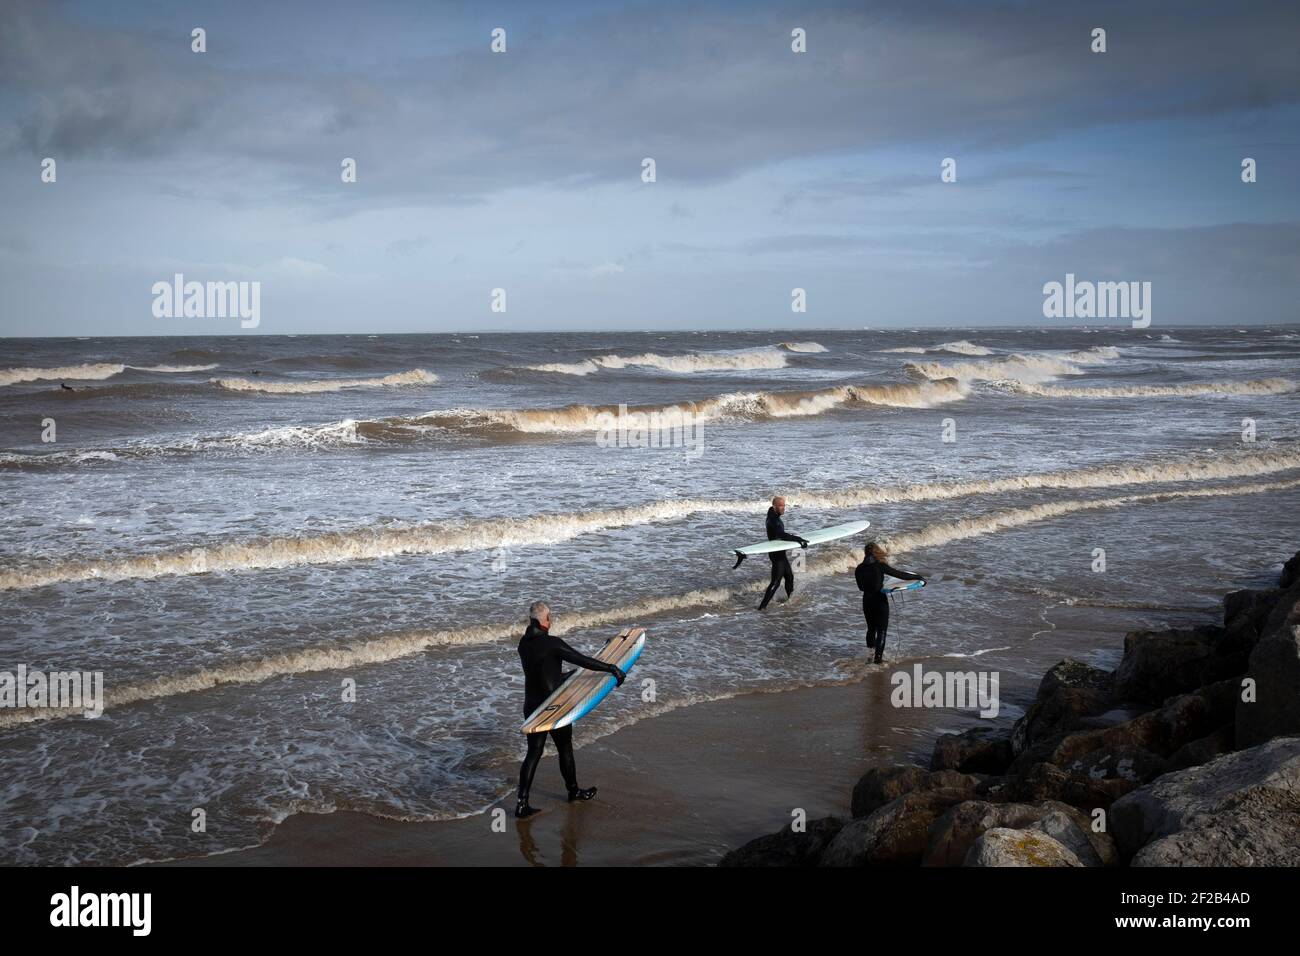 Three surfers walking towards the sea in the mouth of the river Mersey. High tides and a storm which swept across the United Kingdom brought favourable conditions for surfing in Leasowe Bay, Merseyside on 11 March, 2021. Stock Photo